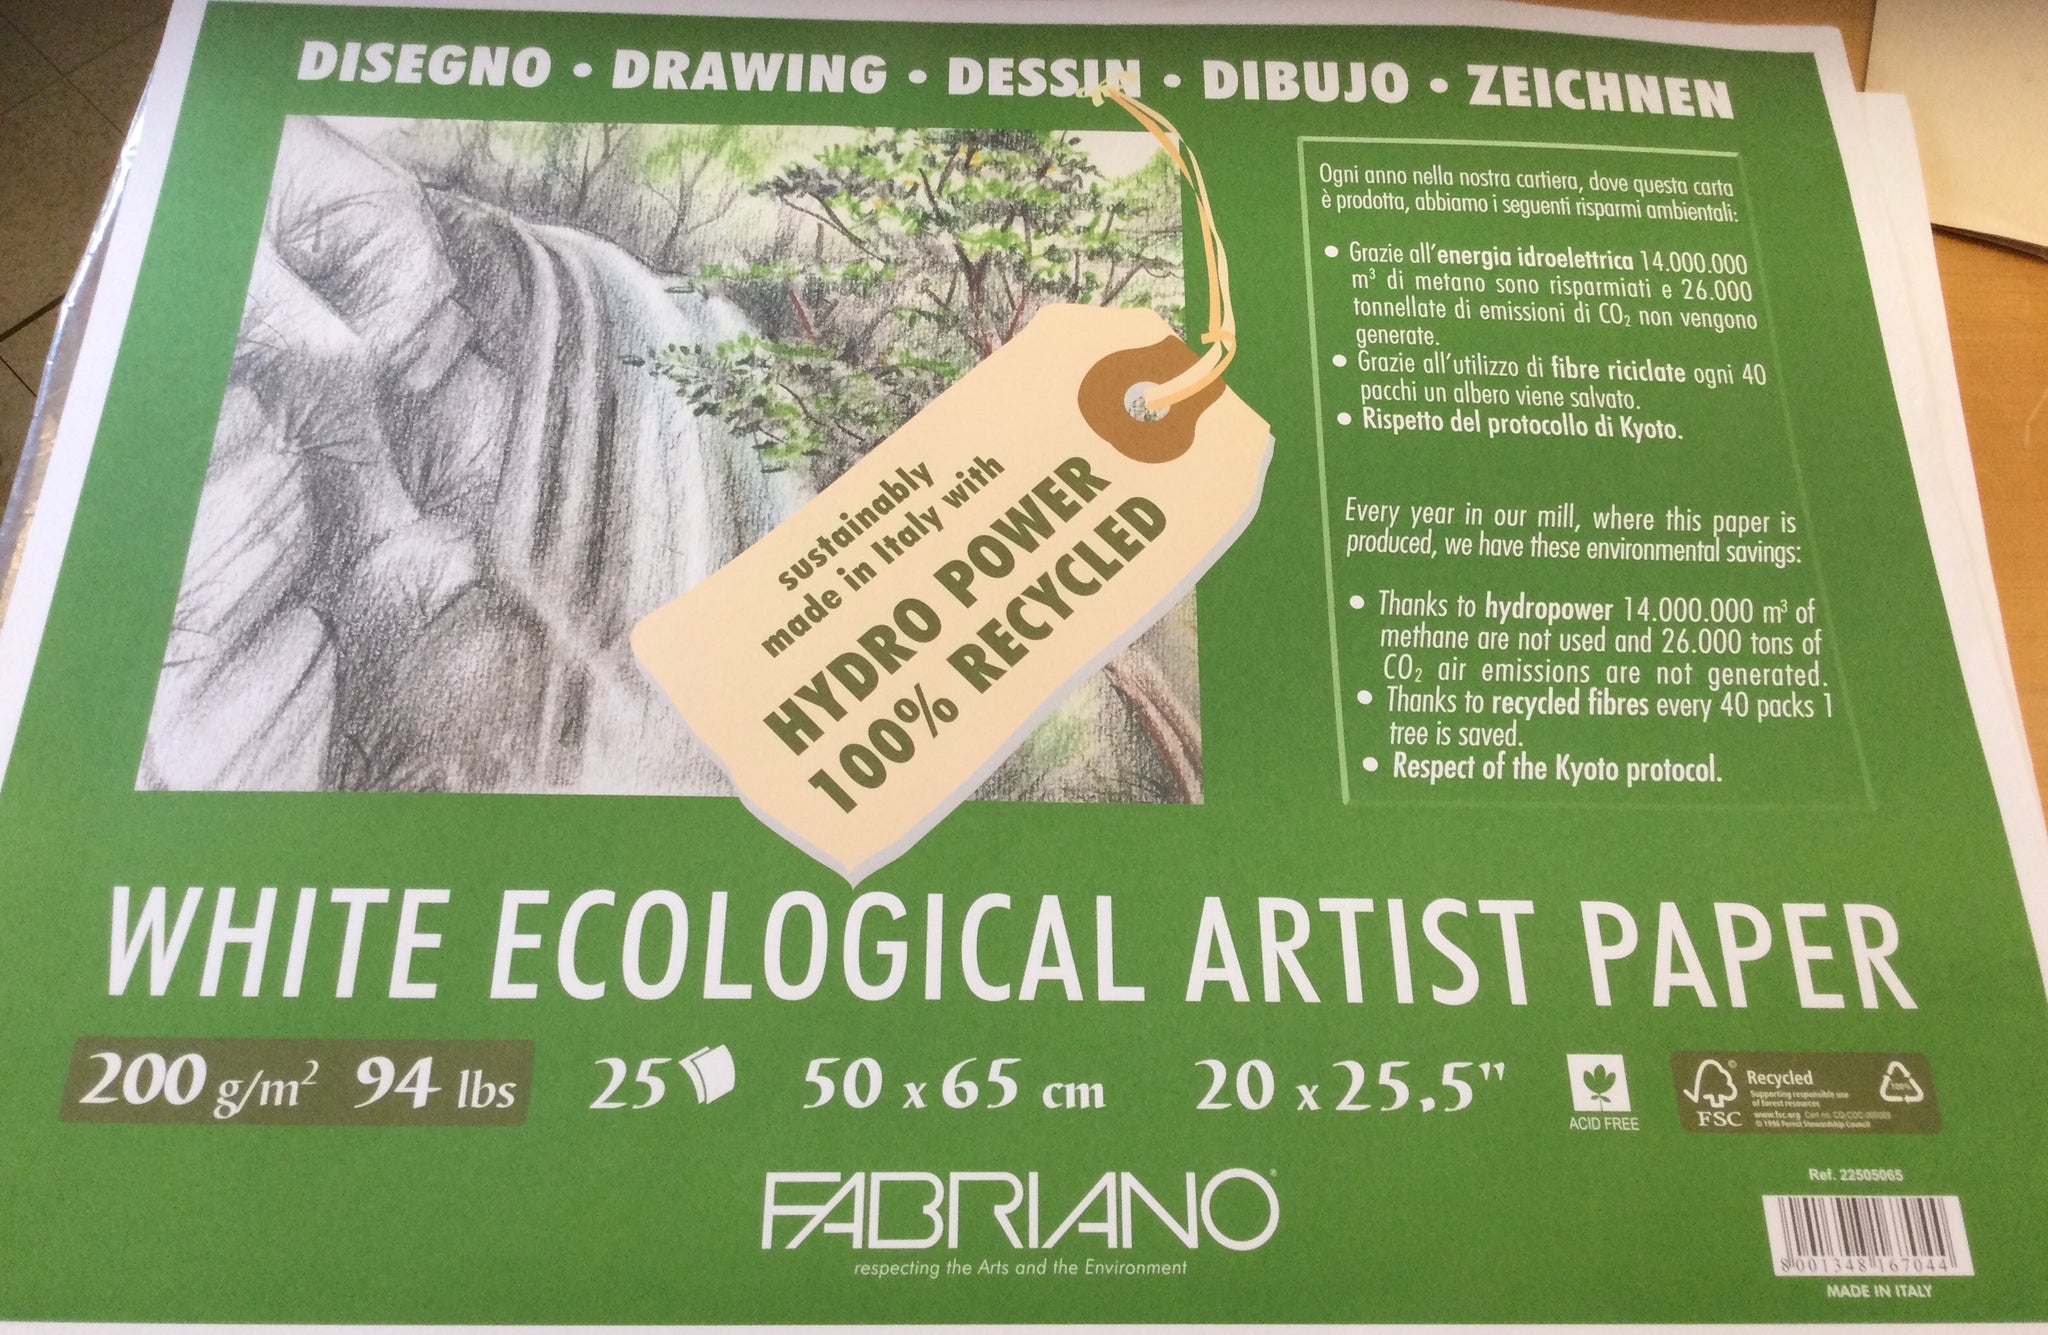 Fabriano Drawing White ecological Artist Paper 94lb.